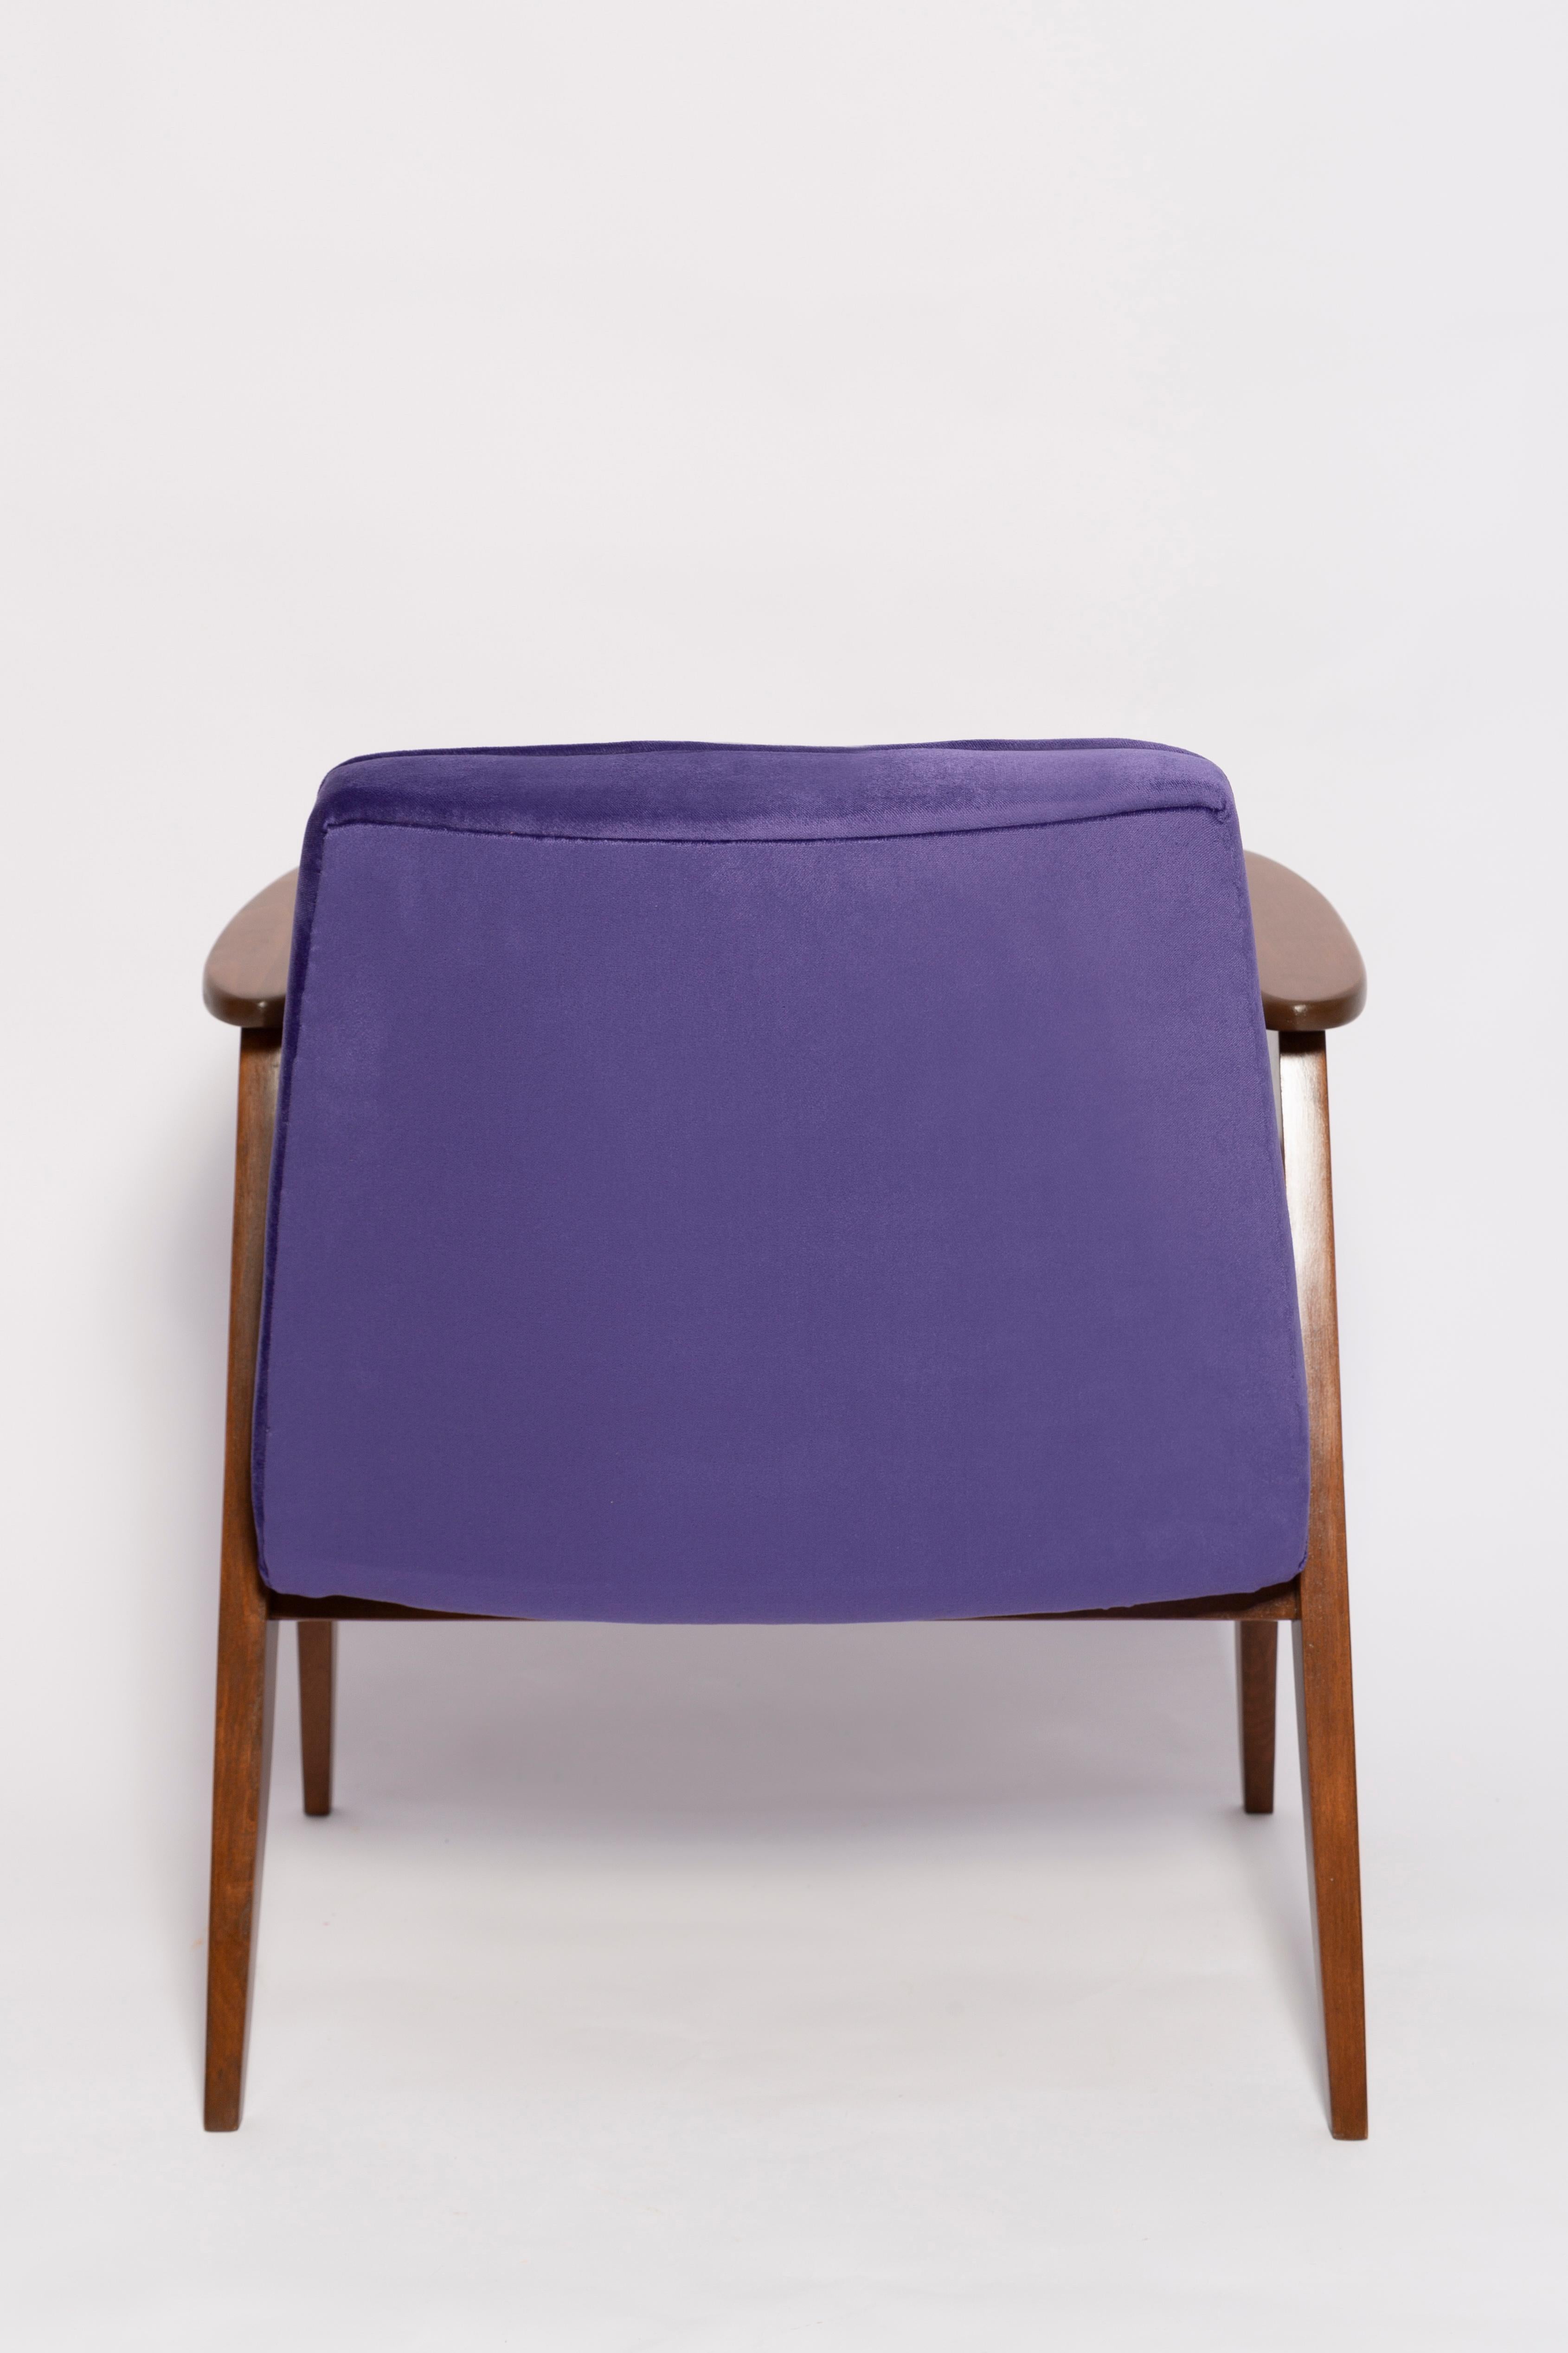 Textile Pair of Mid-Century 366 Armchairs, Mint and Purple, by Chierowski, Europe, 1960s For Sale